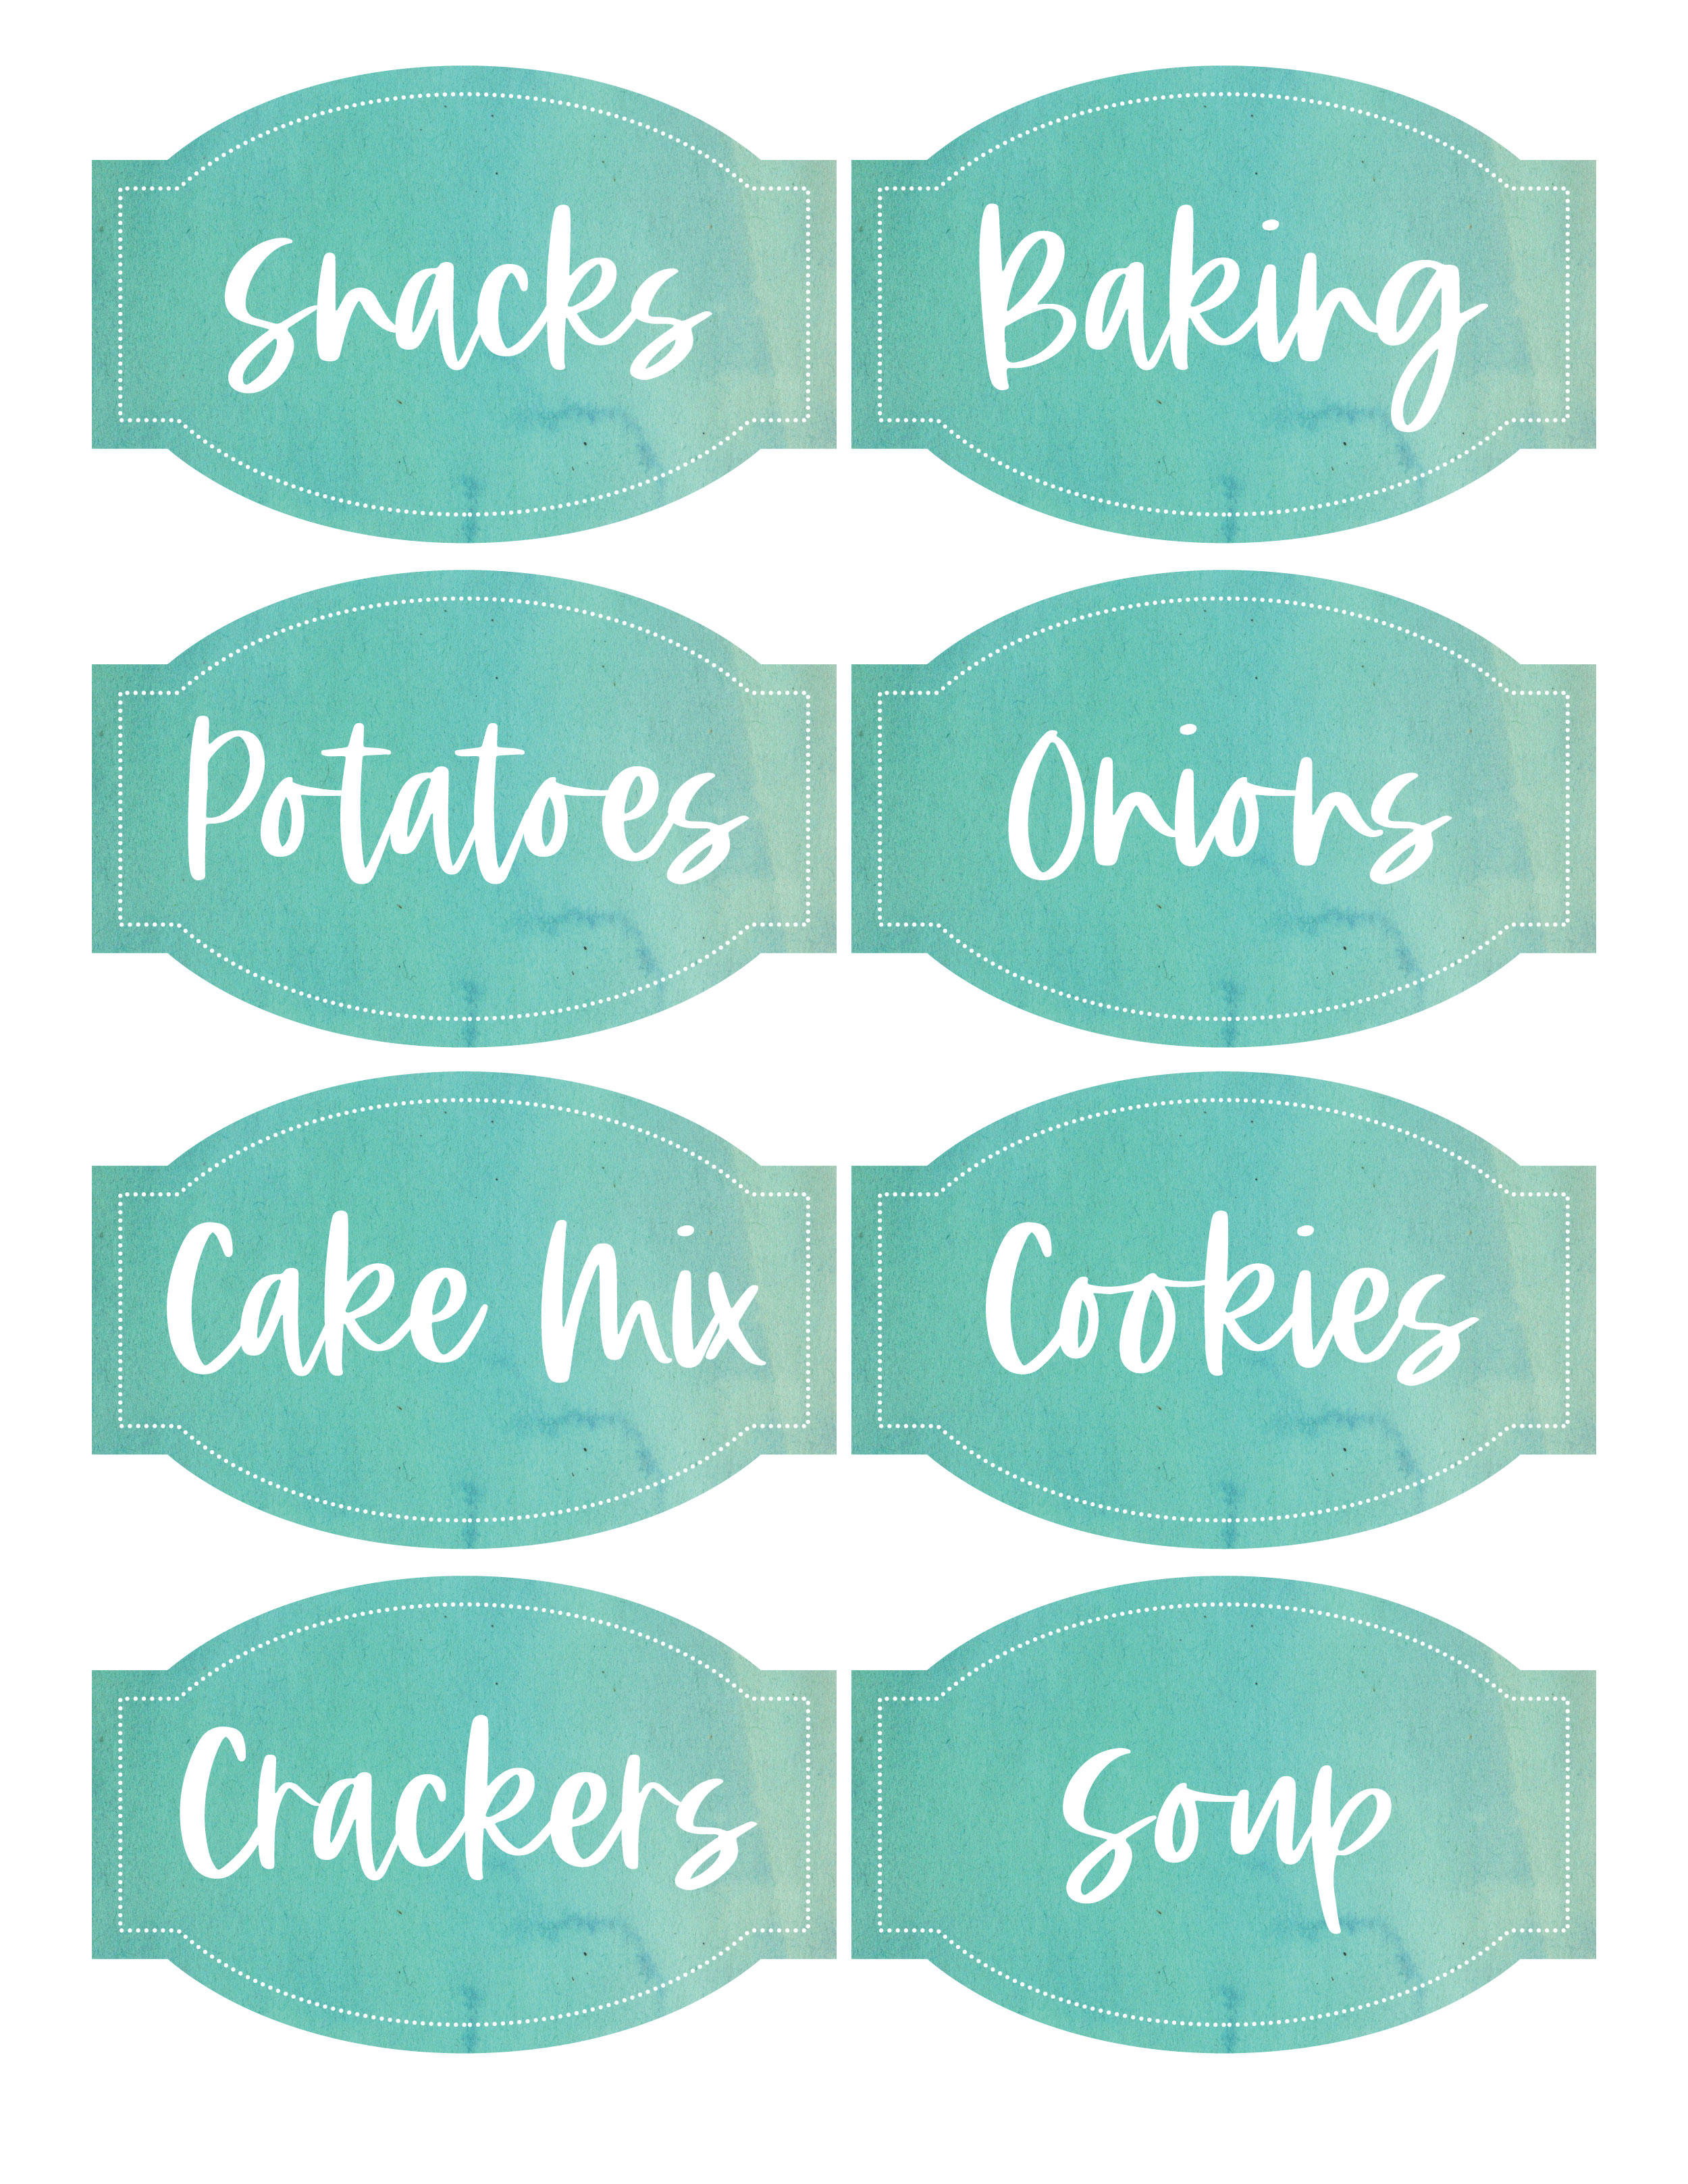 Easy-to-Use Printable Pantry Labels (That Look Amazing Too!) - The Homes I  Have Made